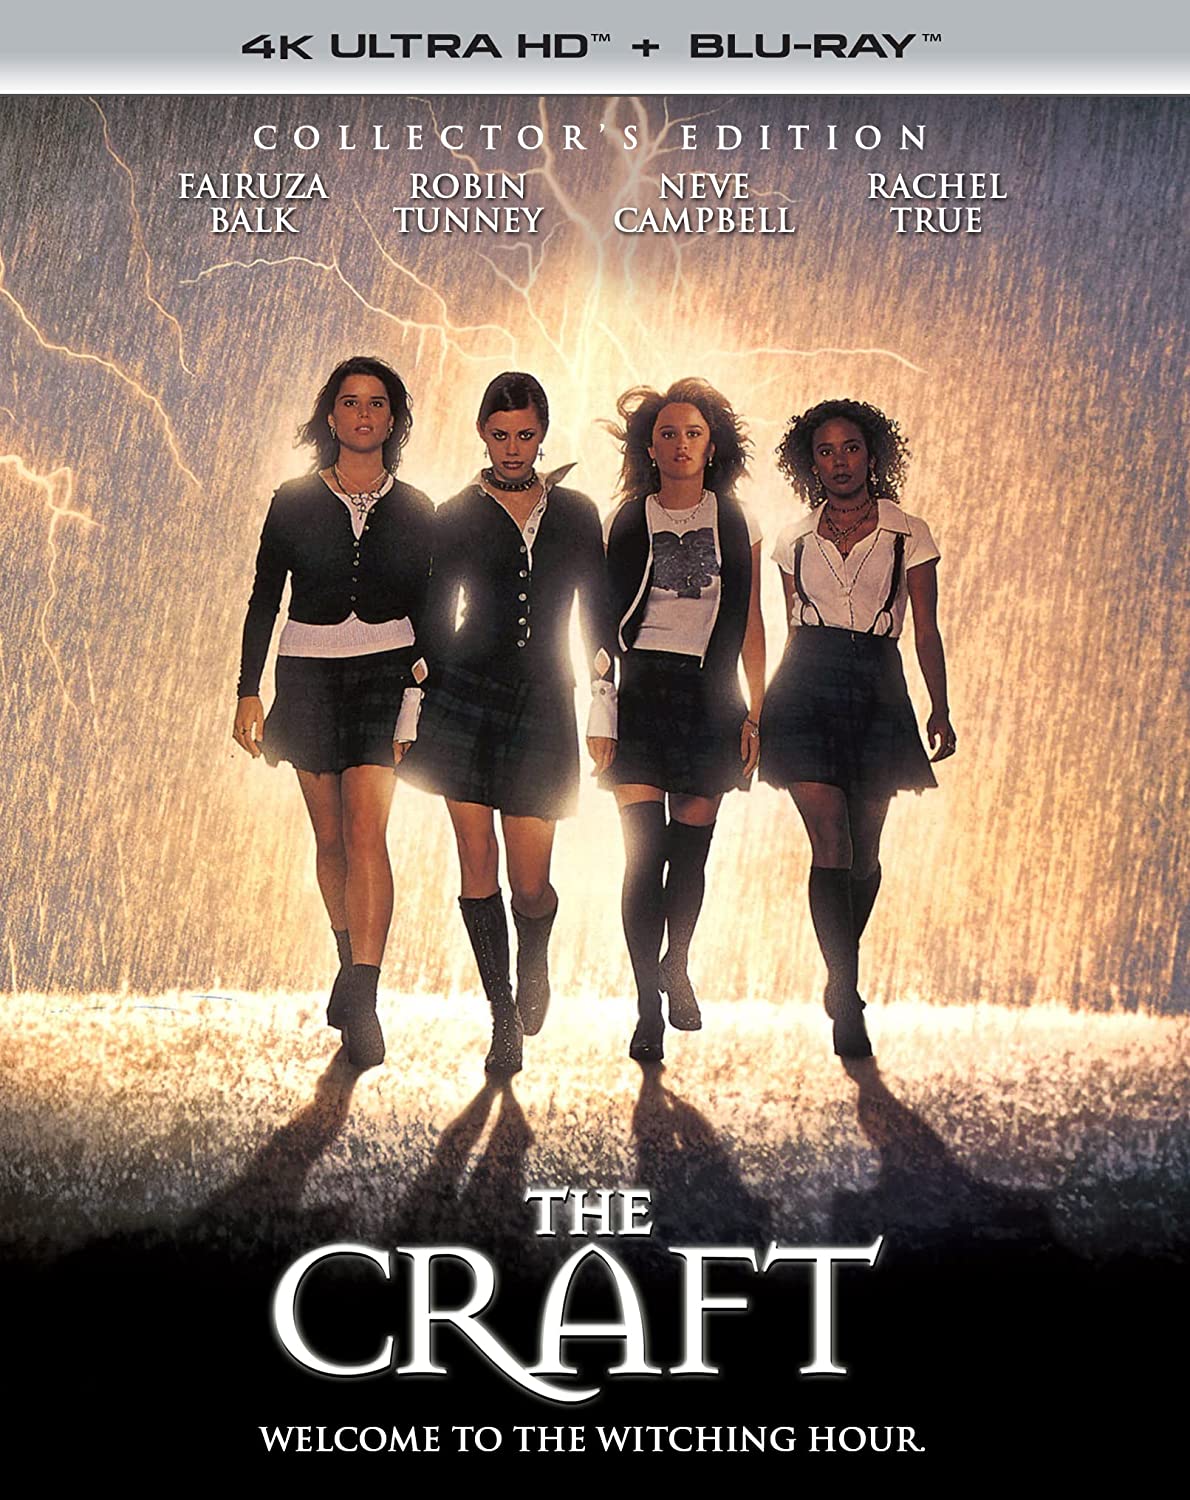 THE CRAFT (COLLECTOR'S EDITION) 4K UHD/BLU-RAY